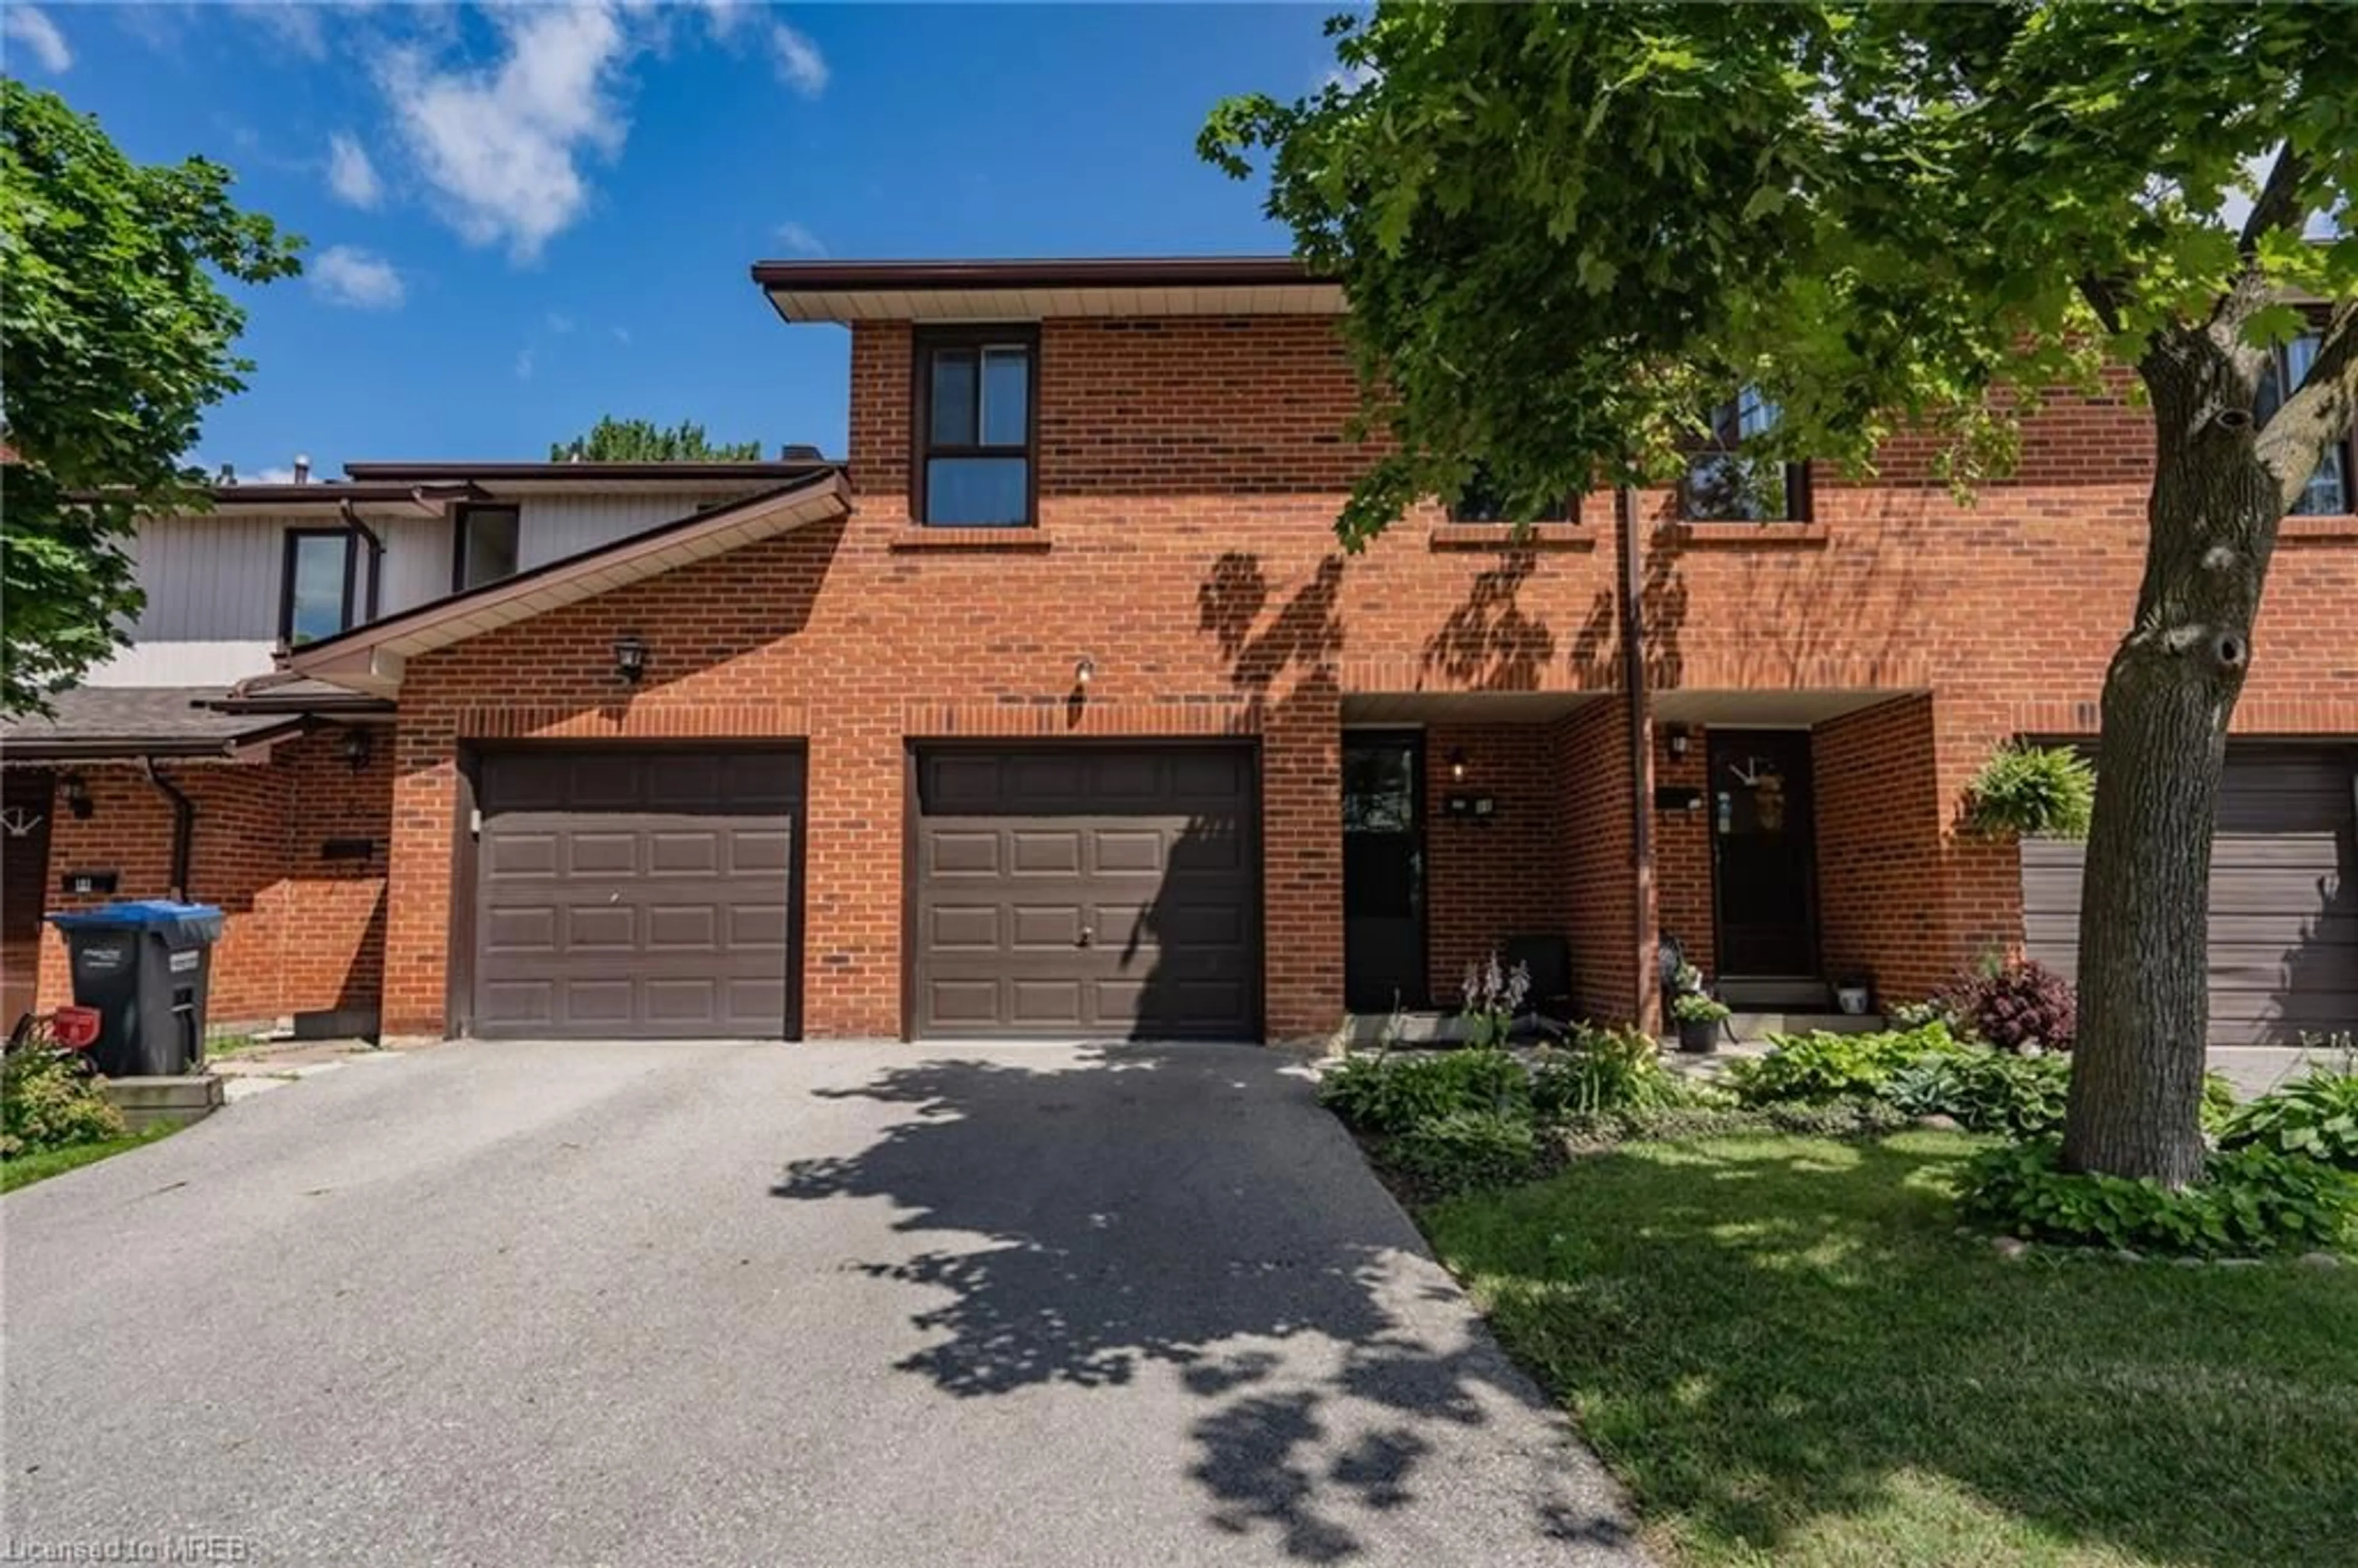 Home with brick exterior material for 88 Dawson Cres, Peel Ontario L6V 3M6